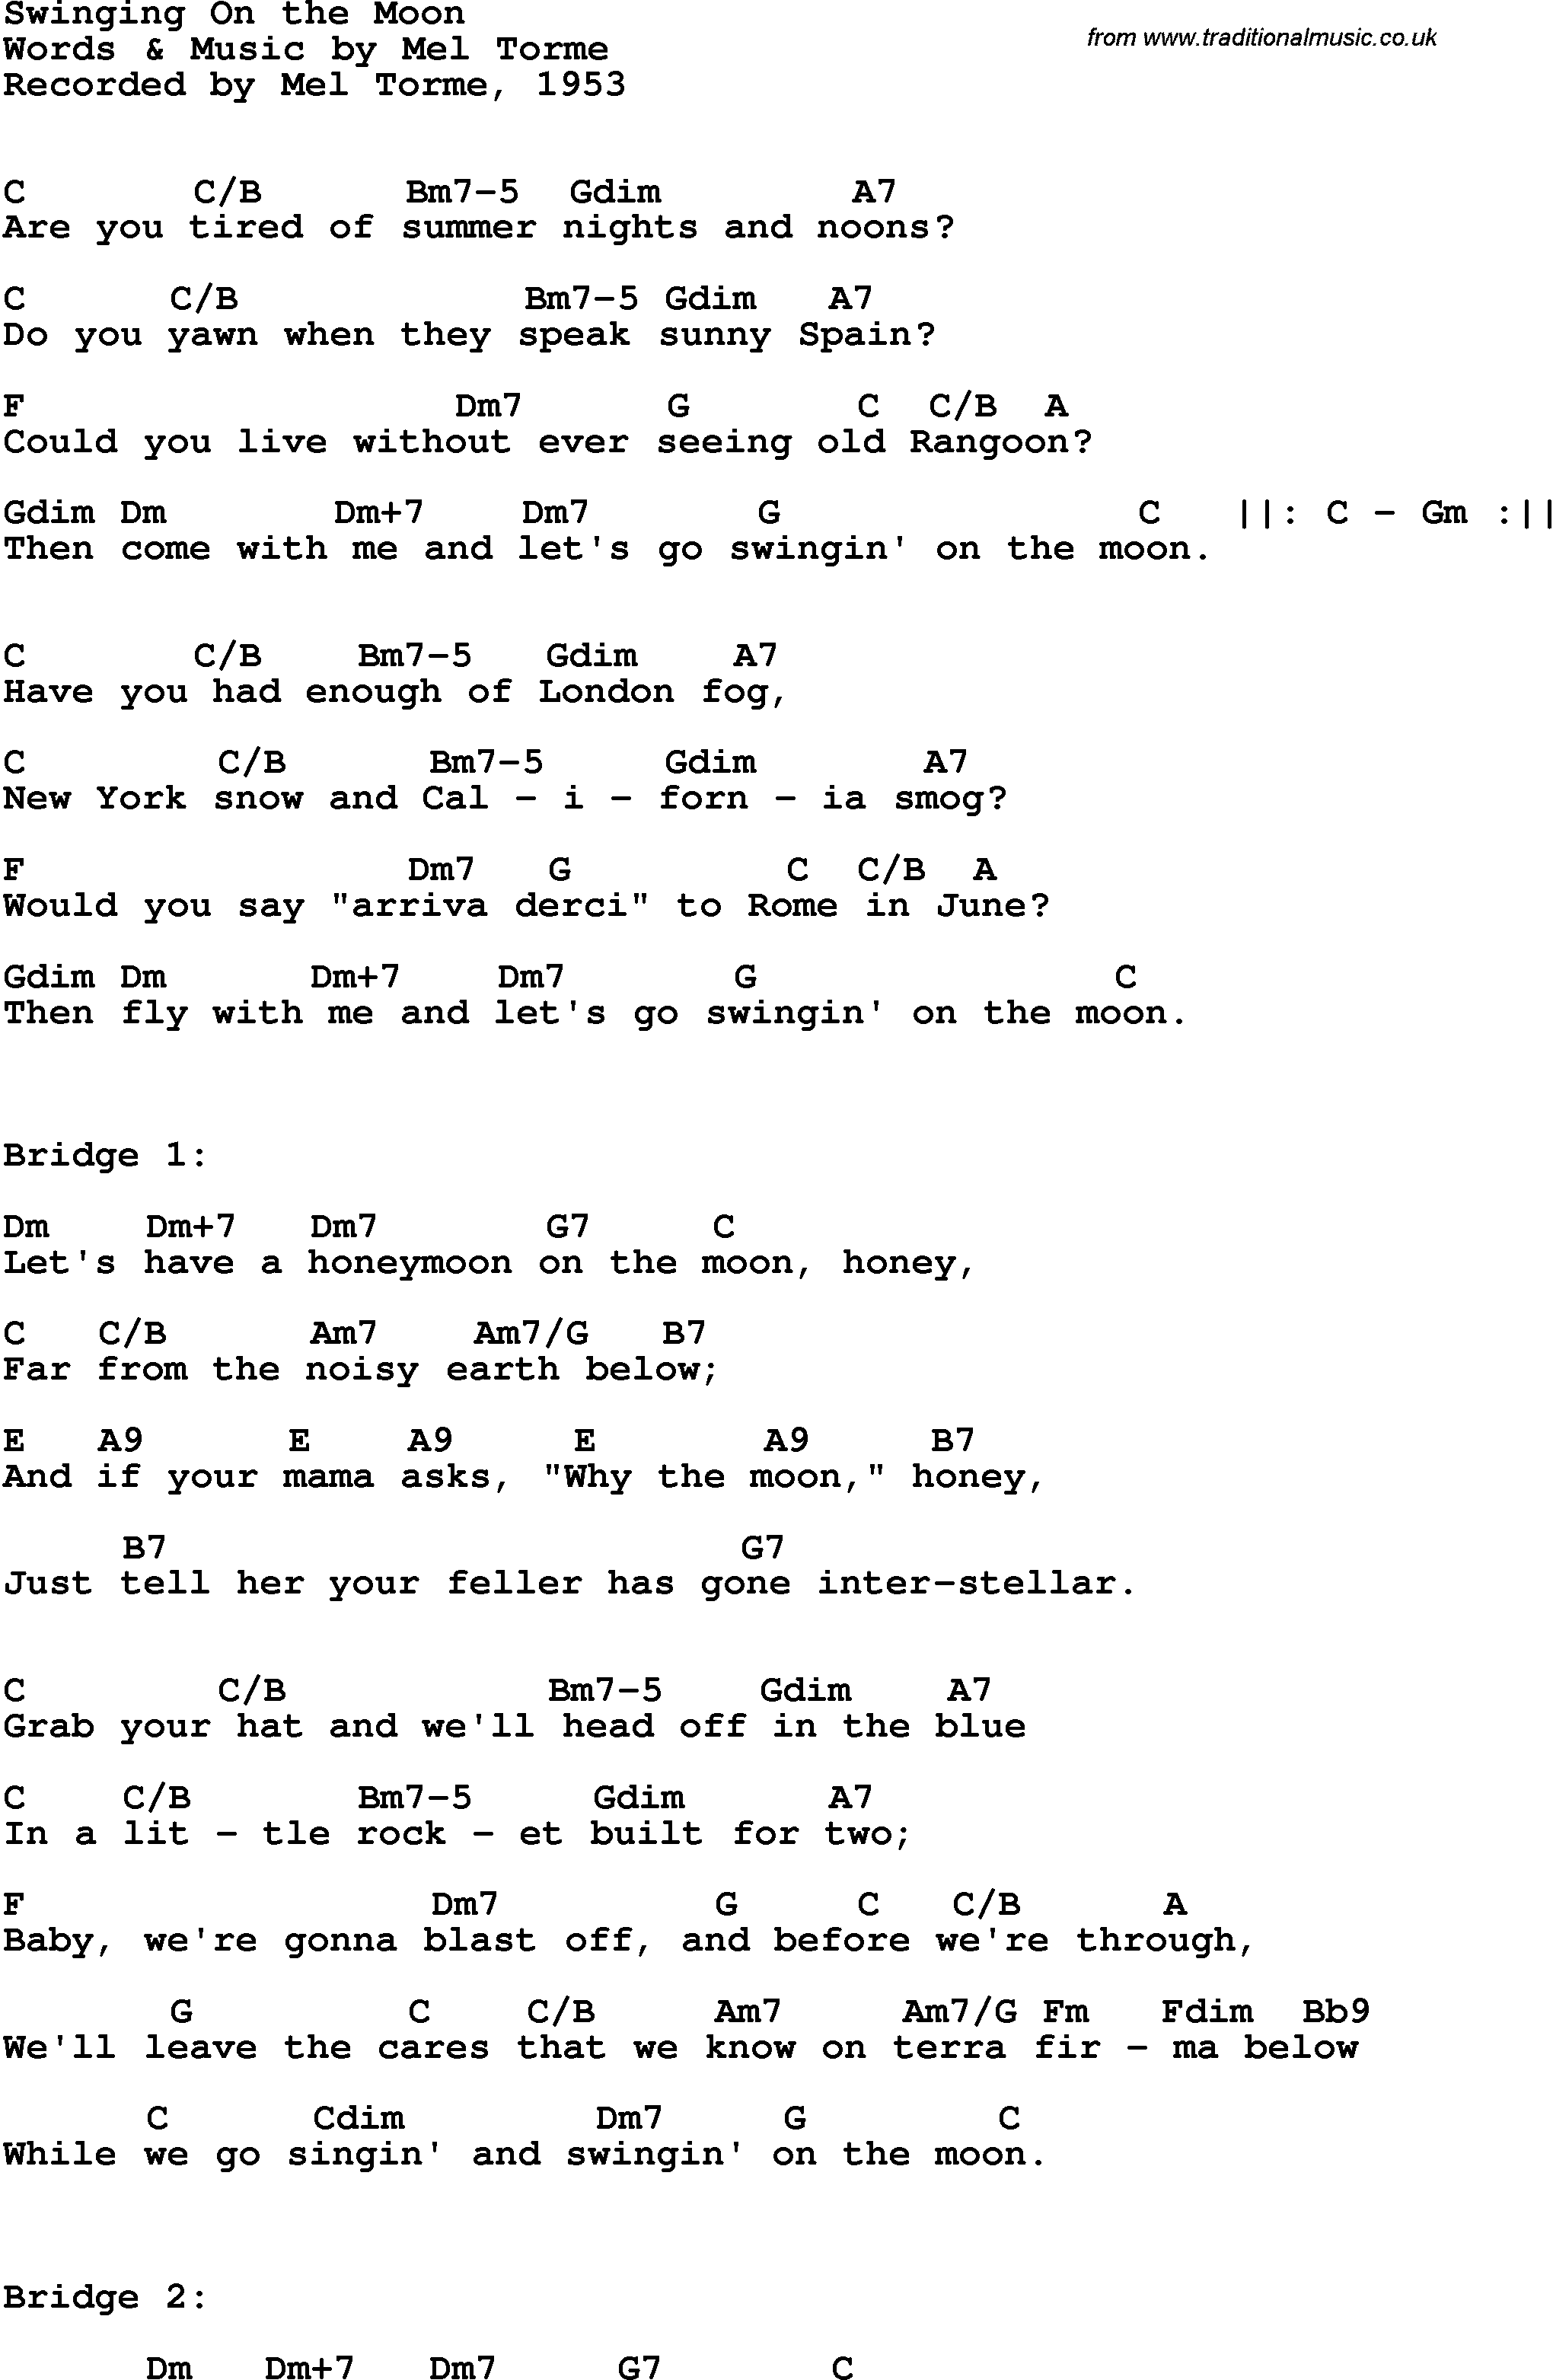 Song Lyrics with guitar chords for Swingin' On The Moon - Mel Torme, 1953